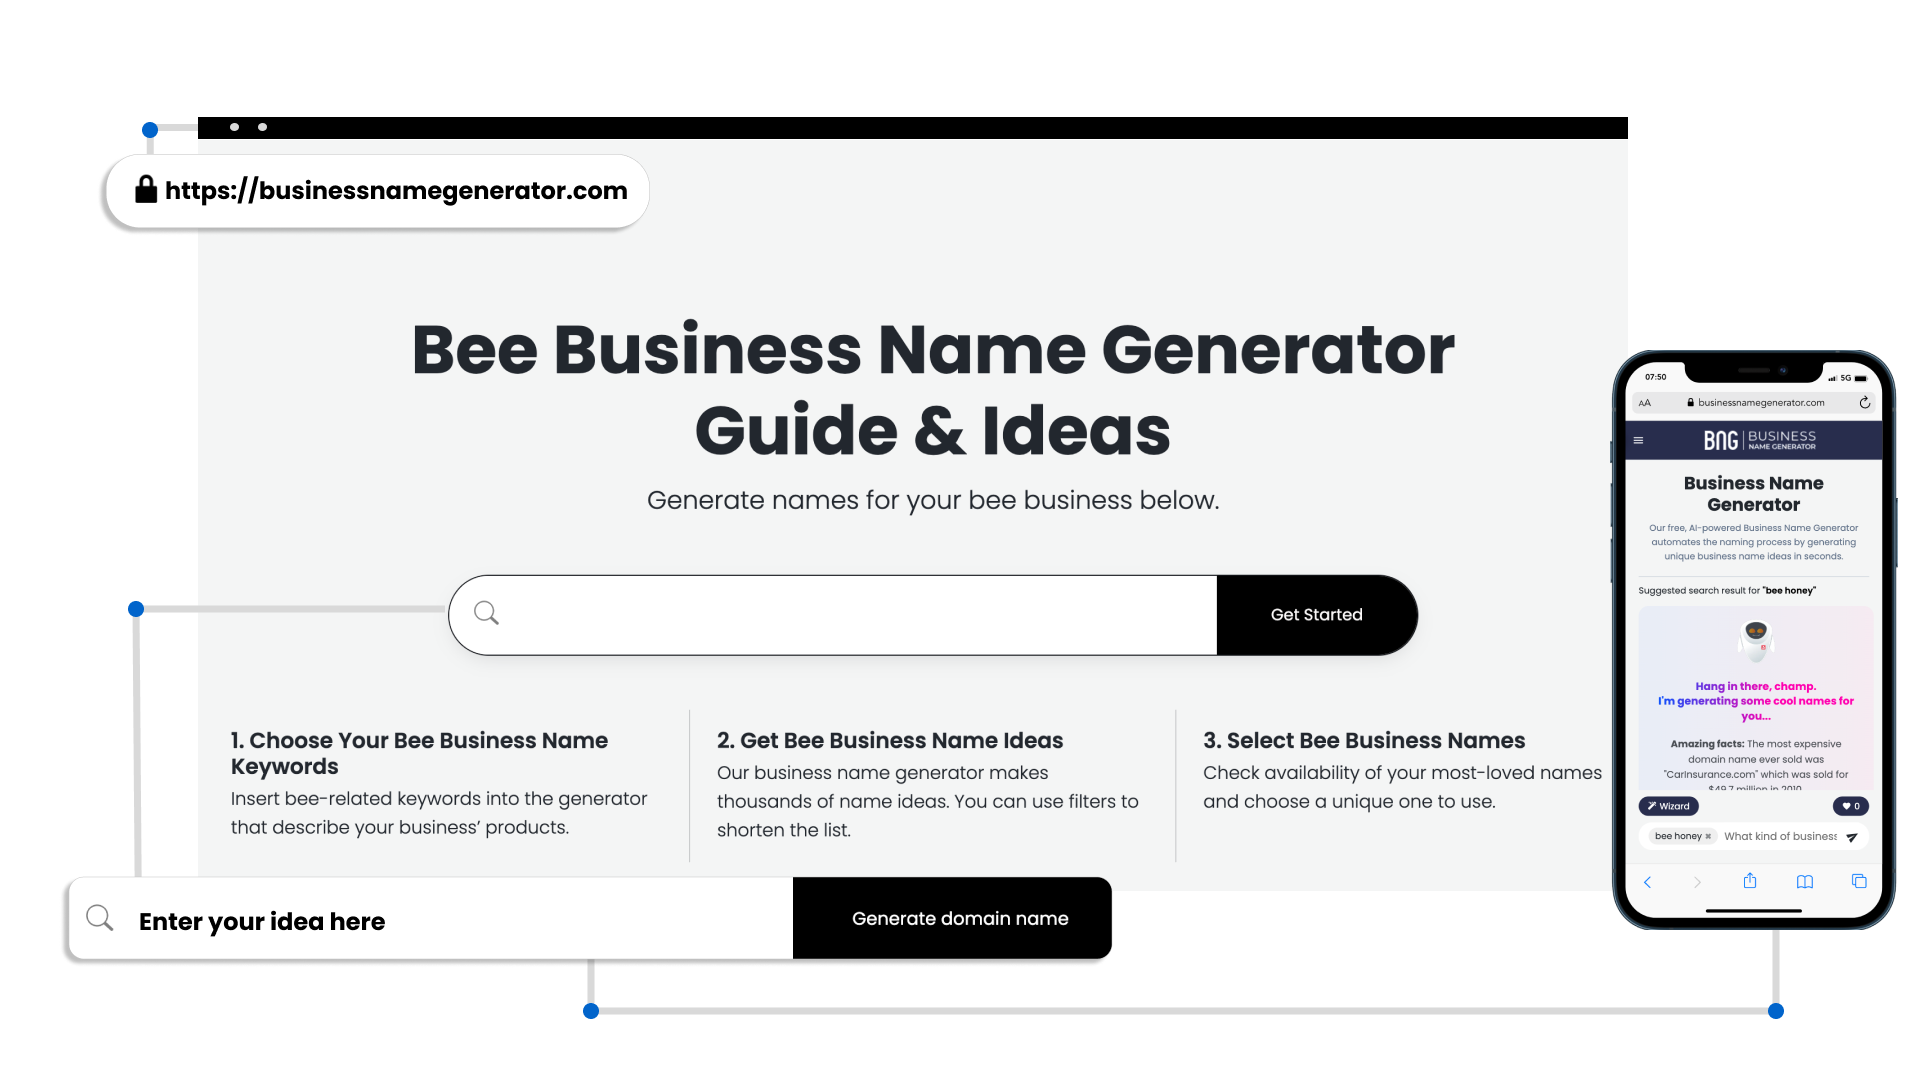 Benefits of Our Bee Business Name Generator